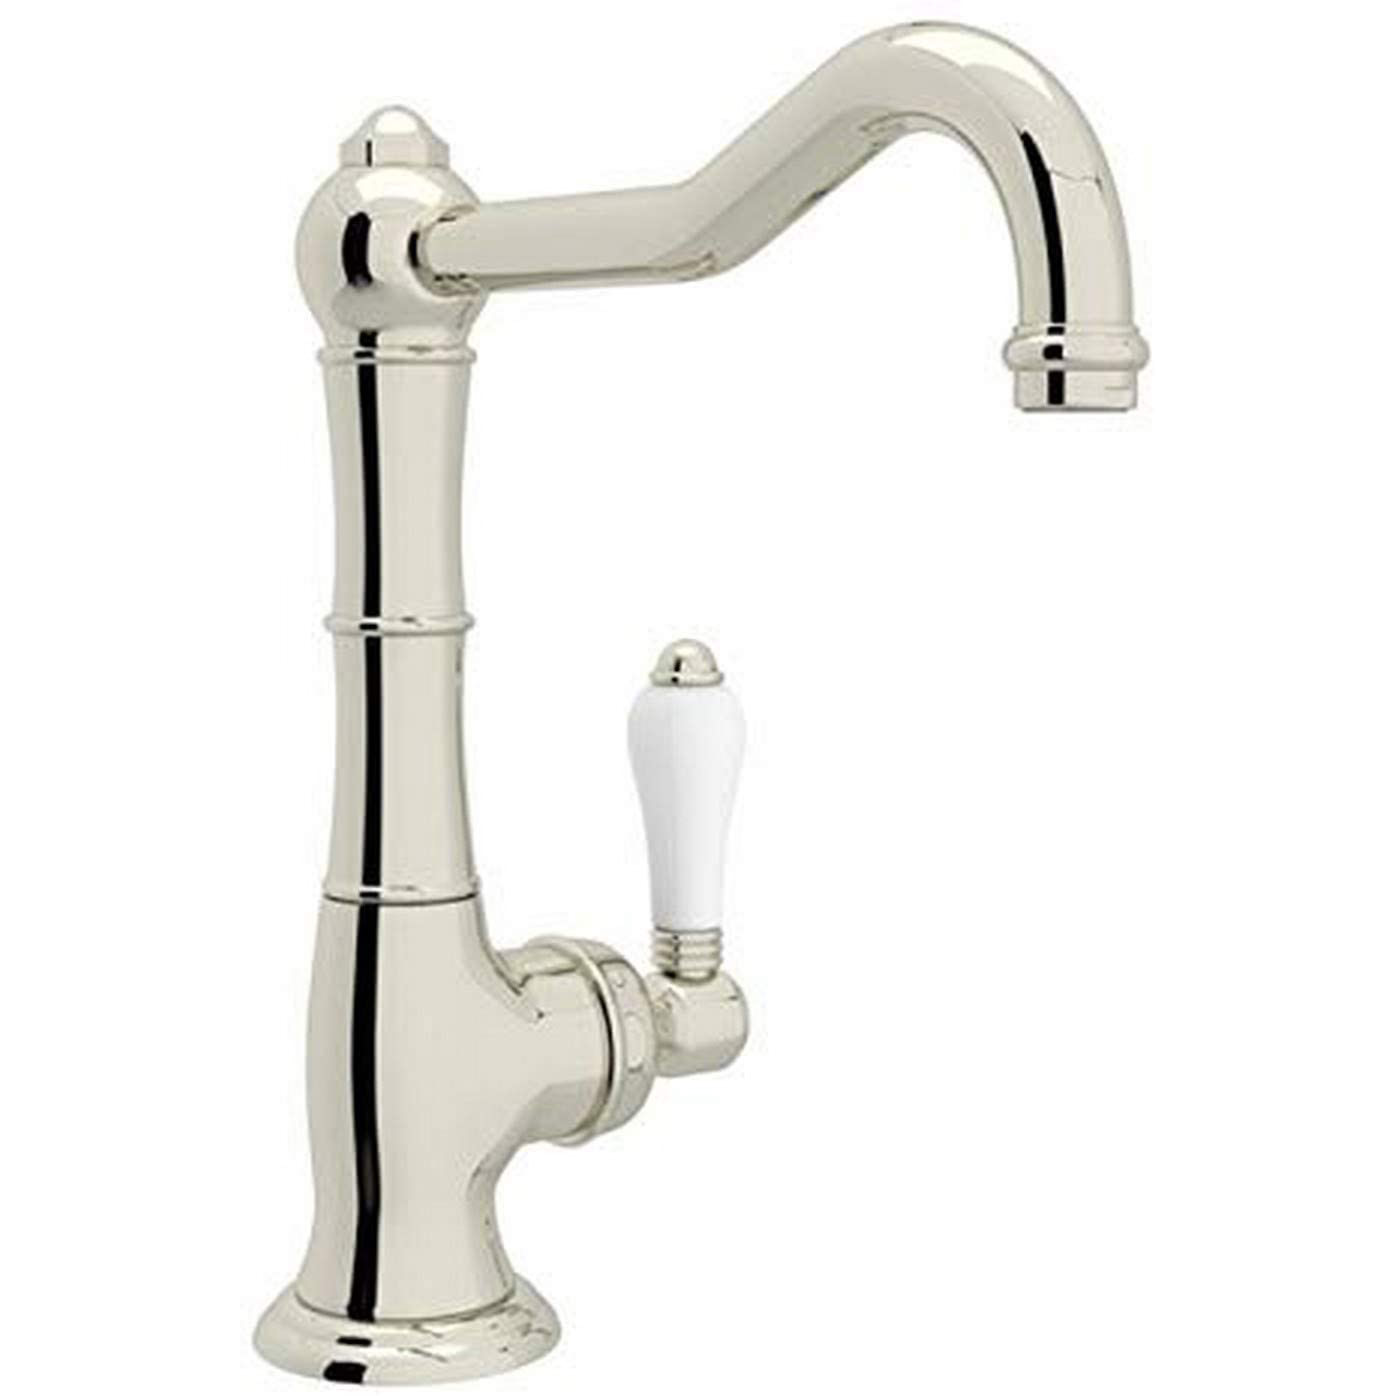 Country Bar Faucet in Polished Nickel w/Porcelain Lever